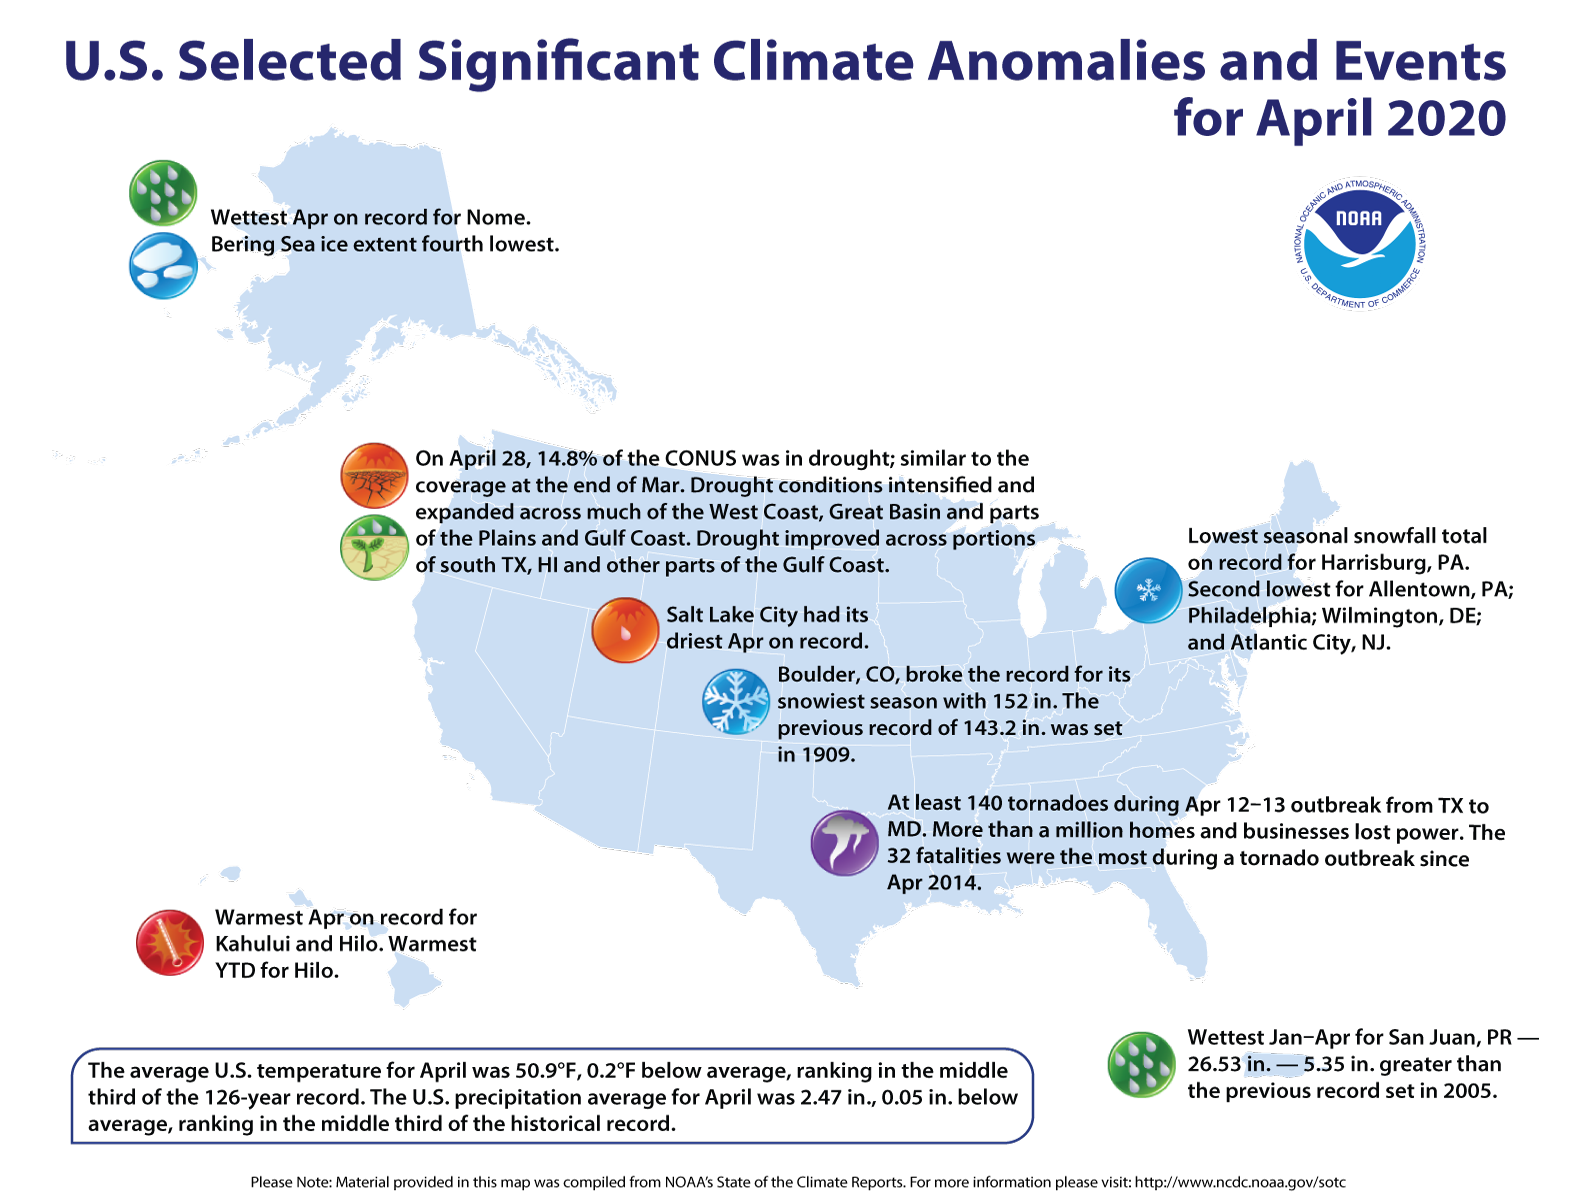 An annotated map of the United States showing notable climate and weather events that occurred across the country during April 2020. For details, please visit http://bit.ly/USClimate202004.